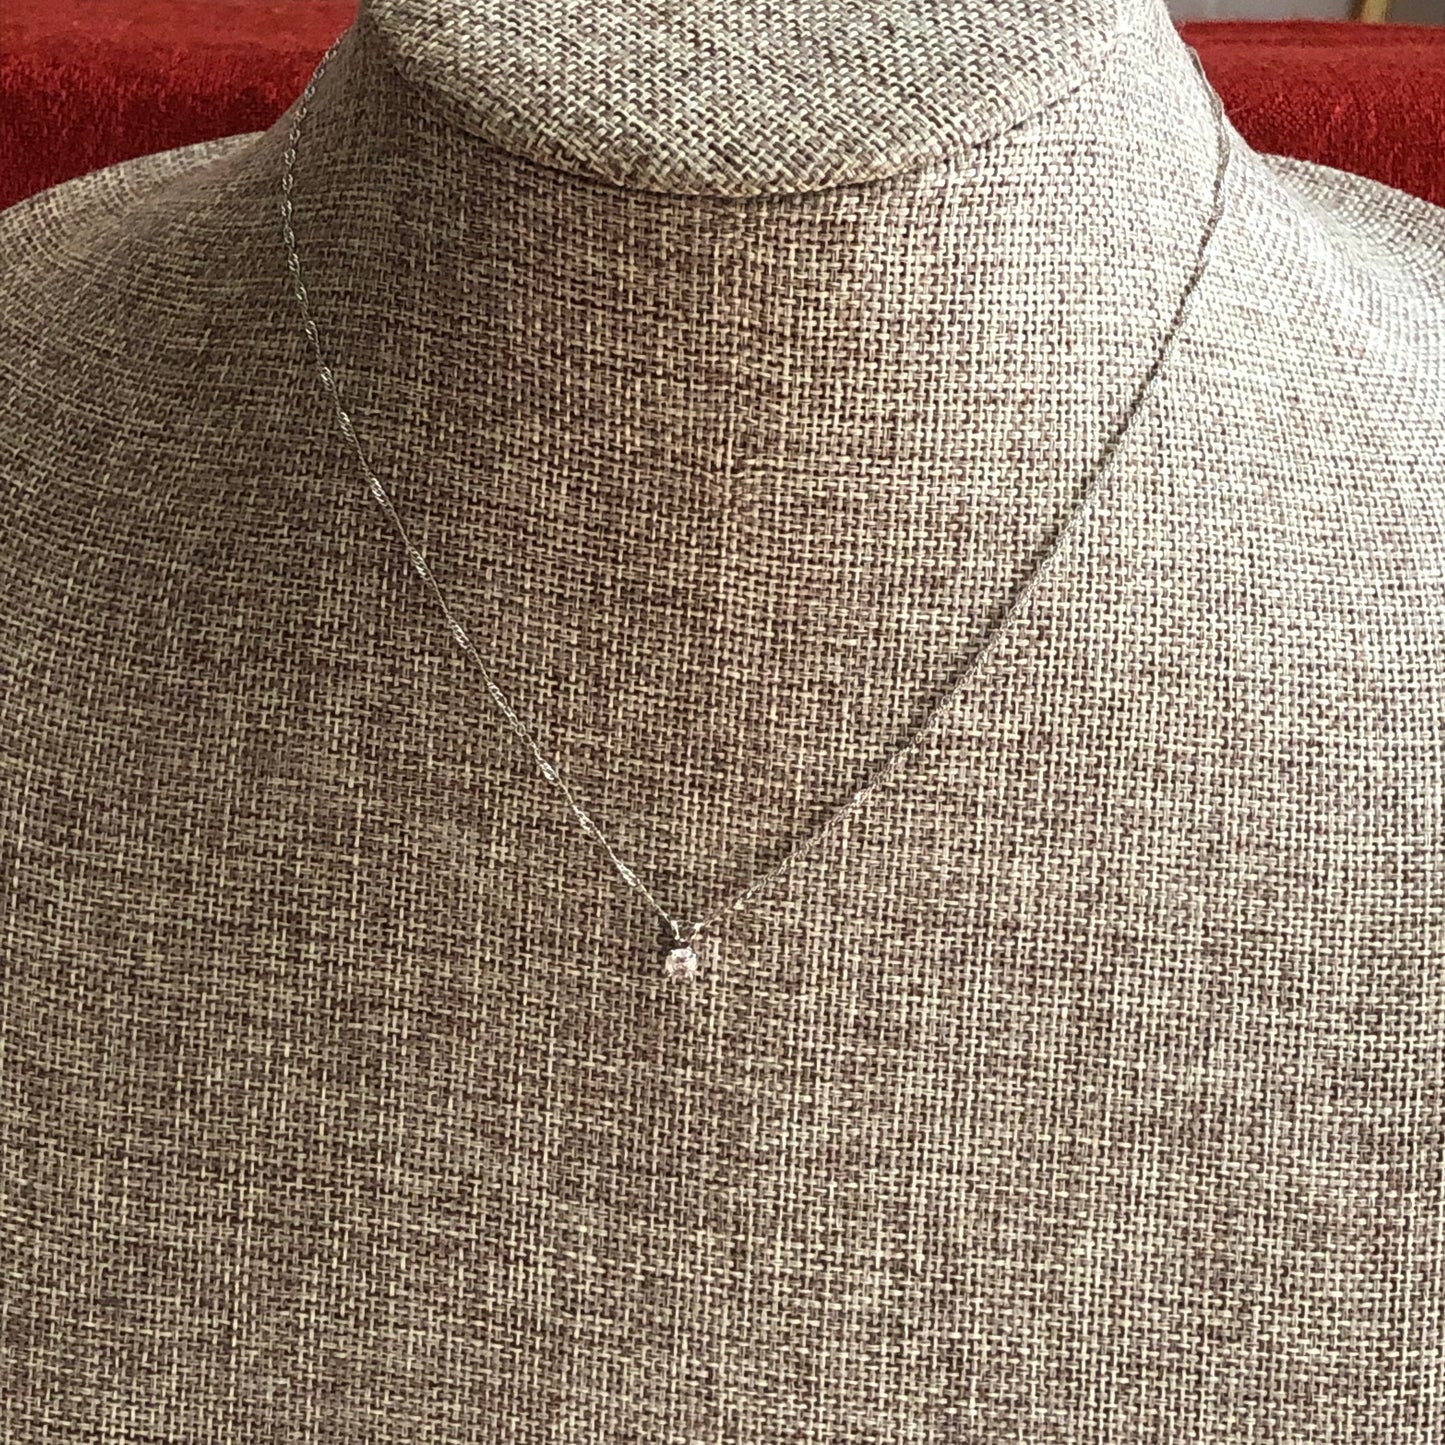 14K White Gold Diamond Necklace-16 inches